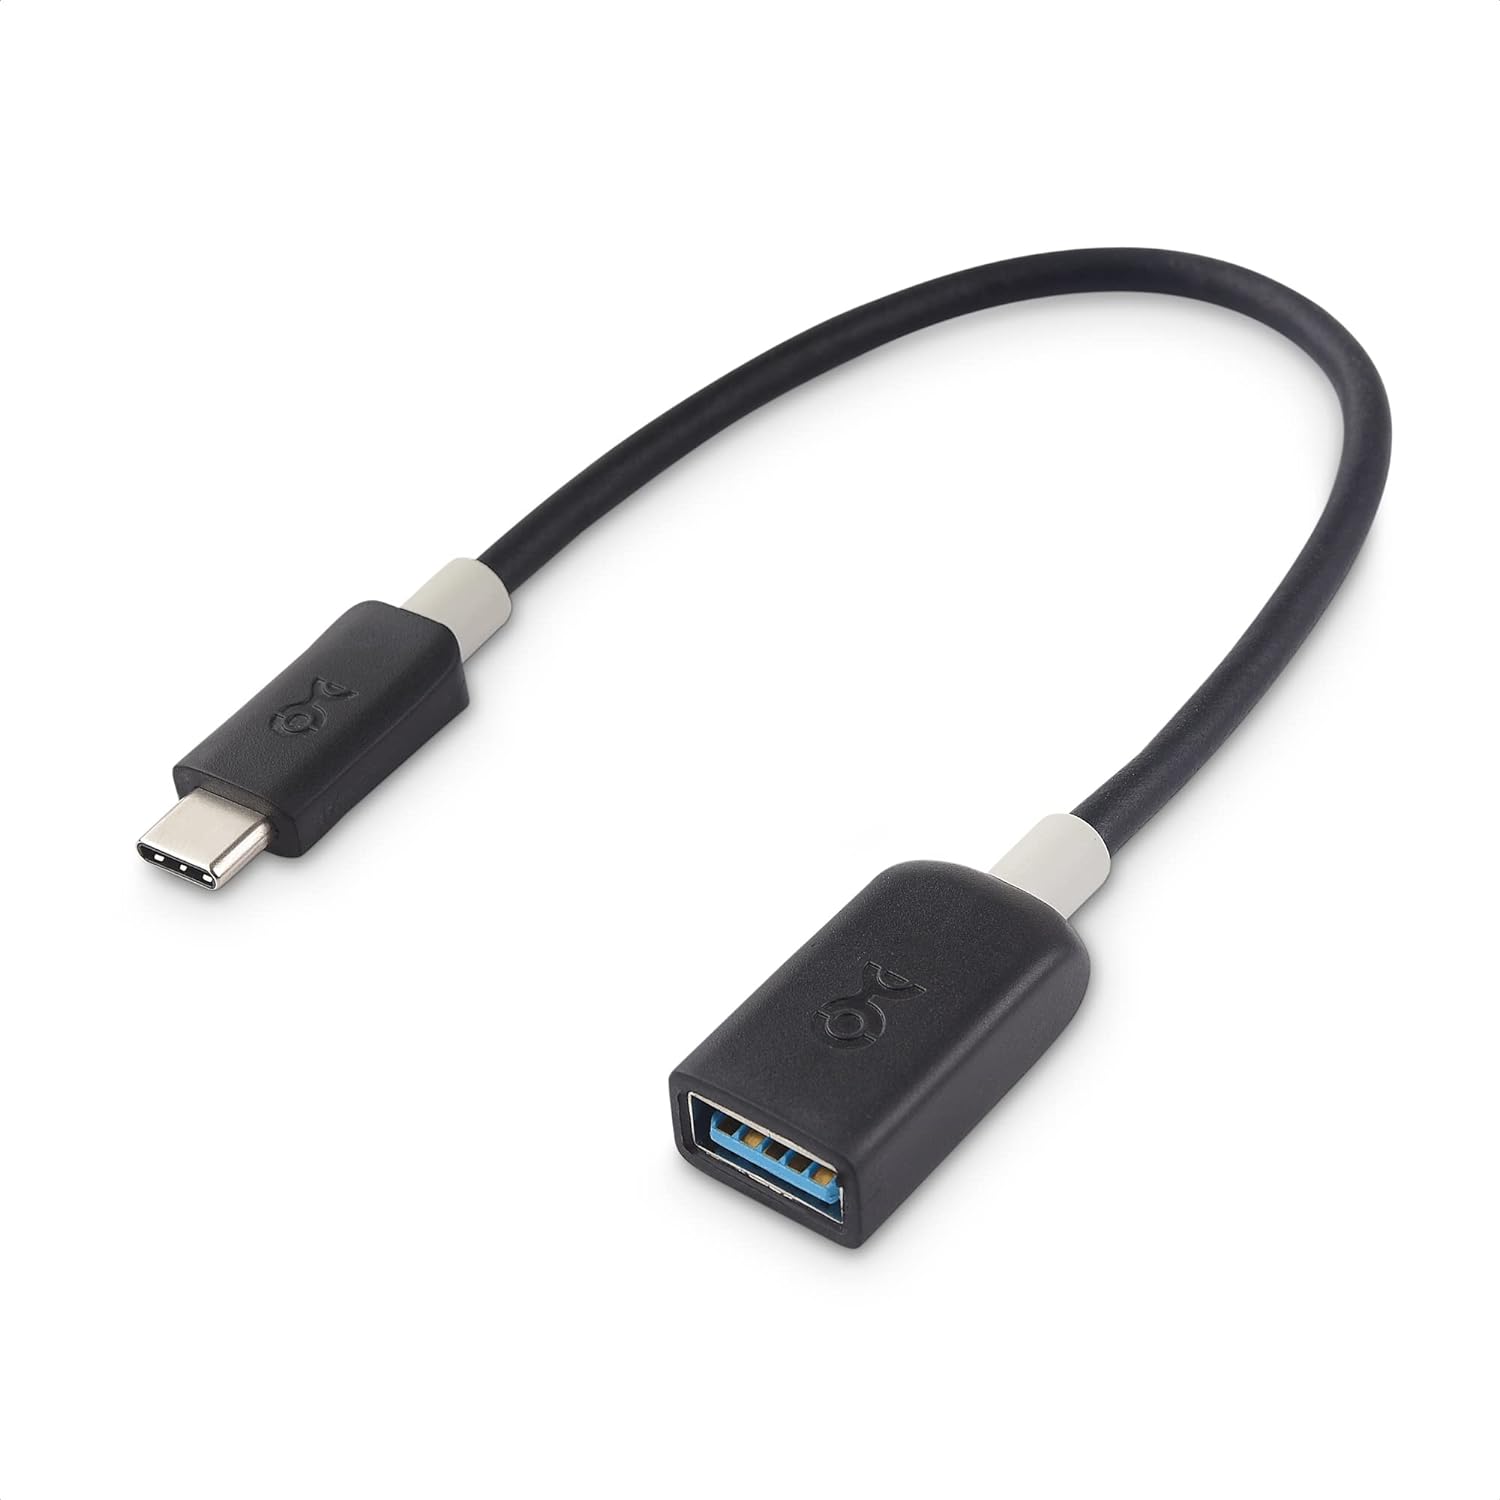 Cable Matters USB C to USB Adapter 6 Inches (USB to USB C Adapter, USB-C to USB 3.0 Adapter, USB C OTG) in Black